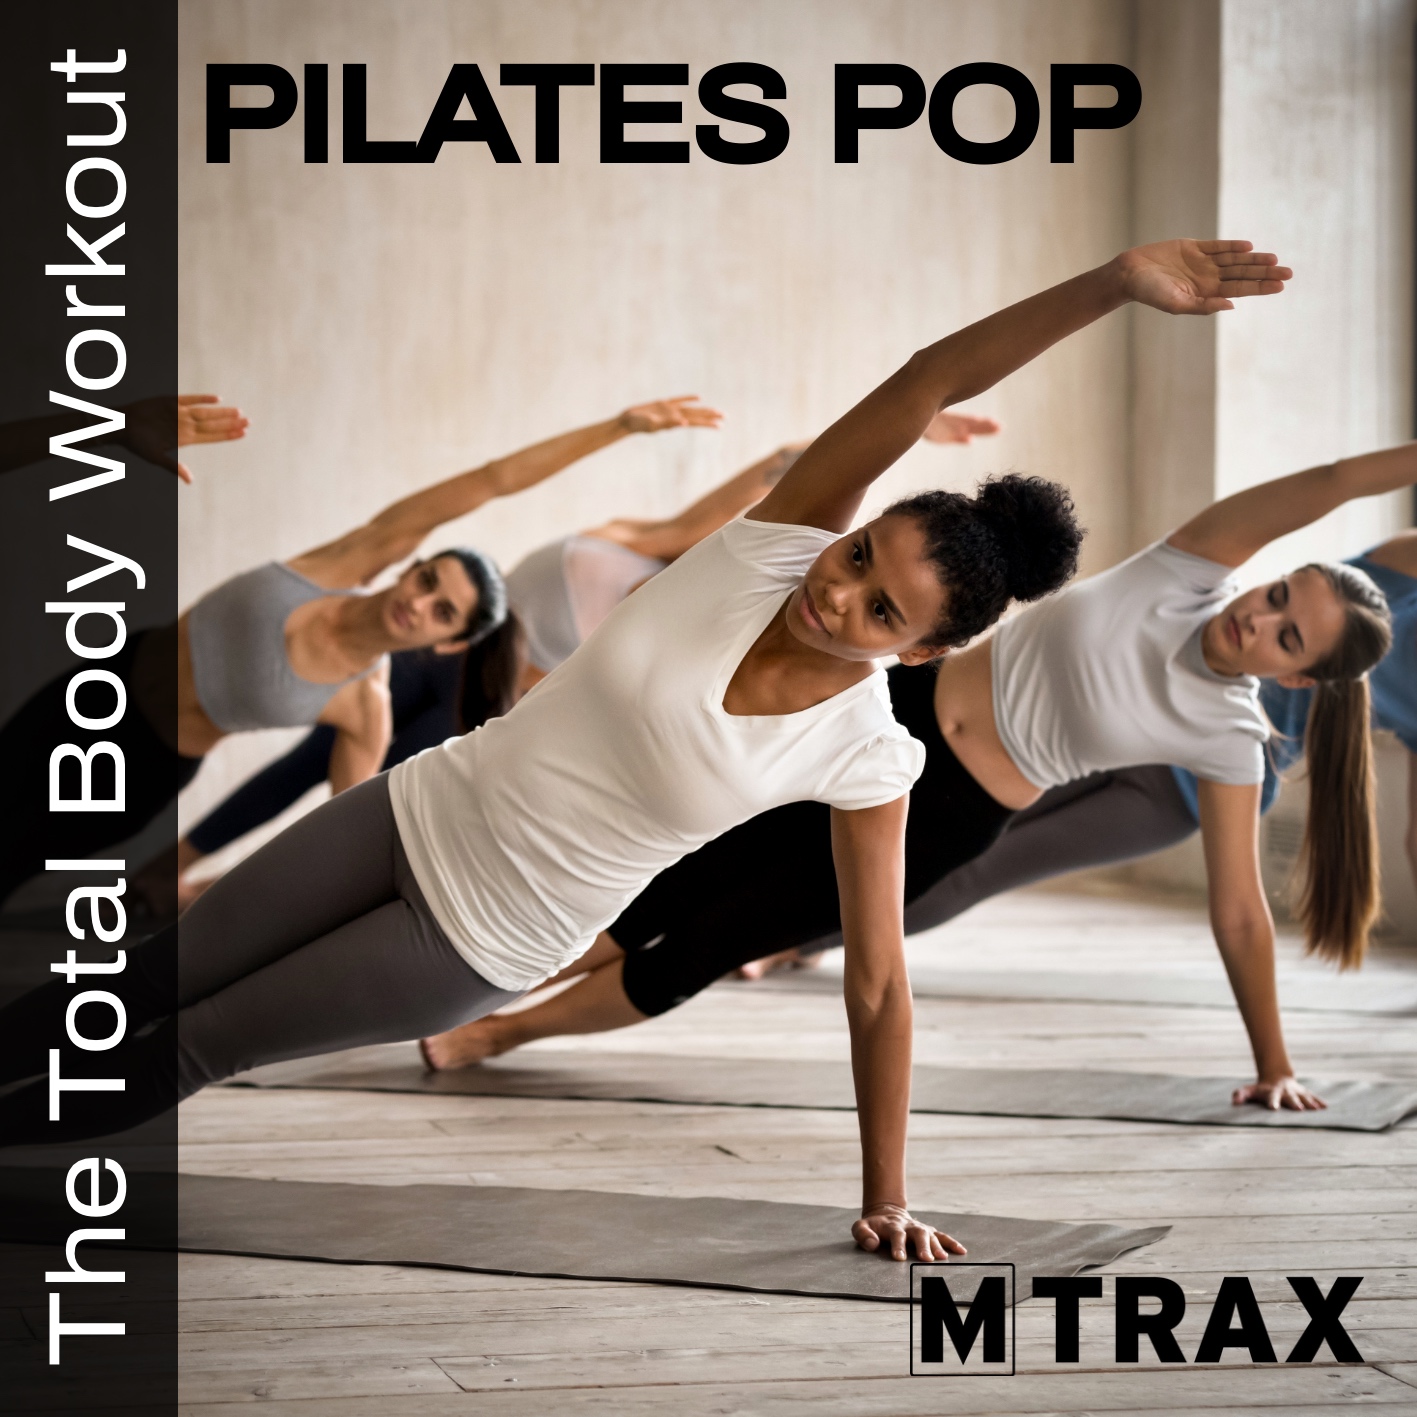 MTRAX Pilates Pop - The total body workout (CD)